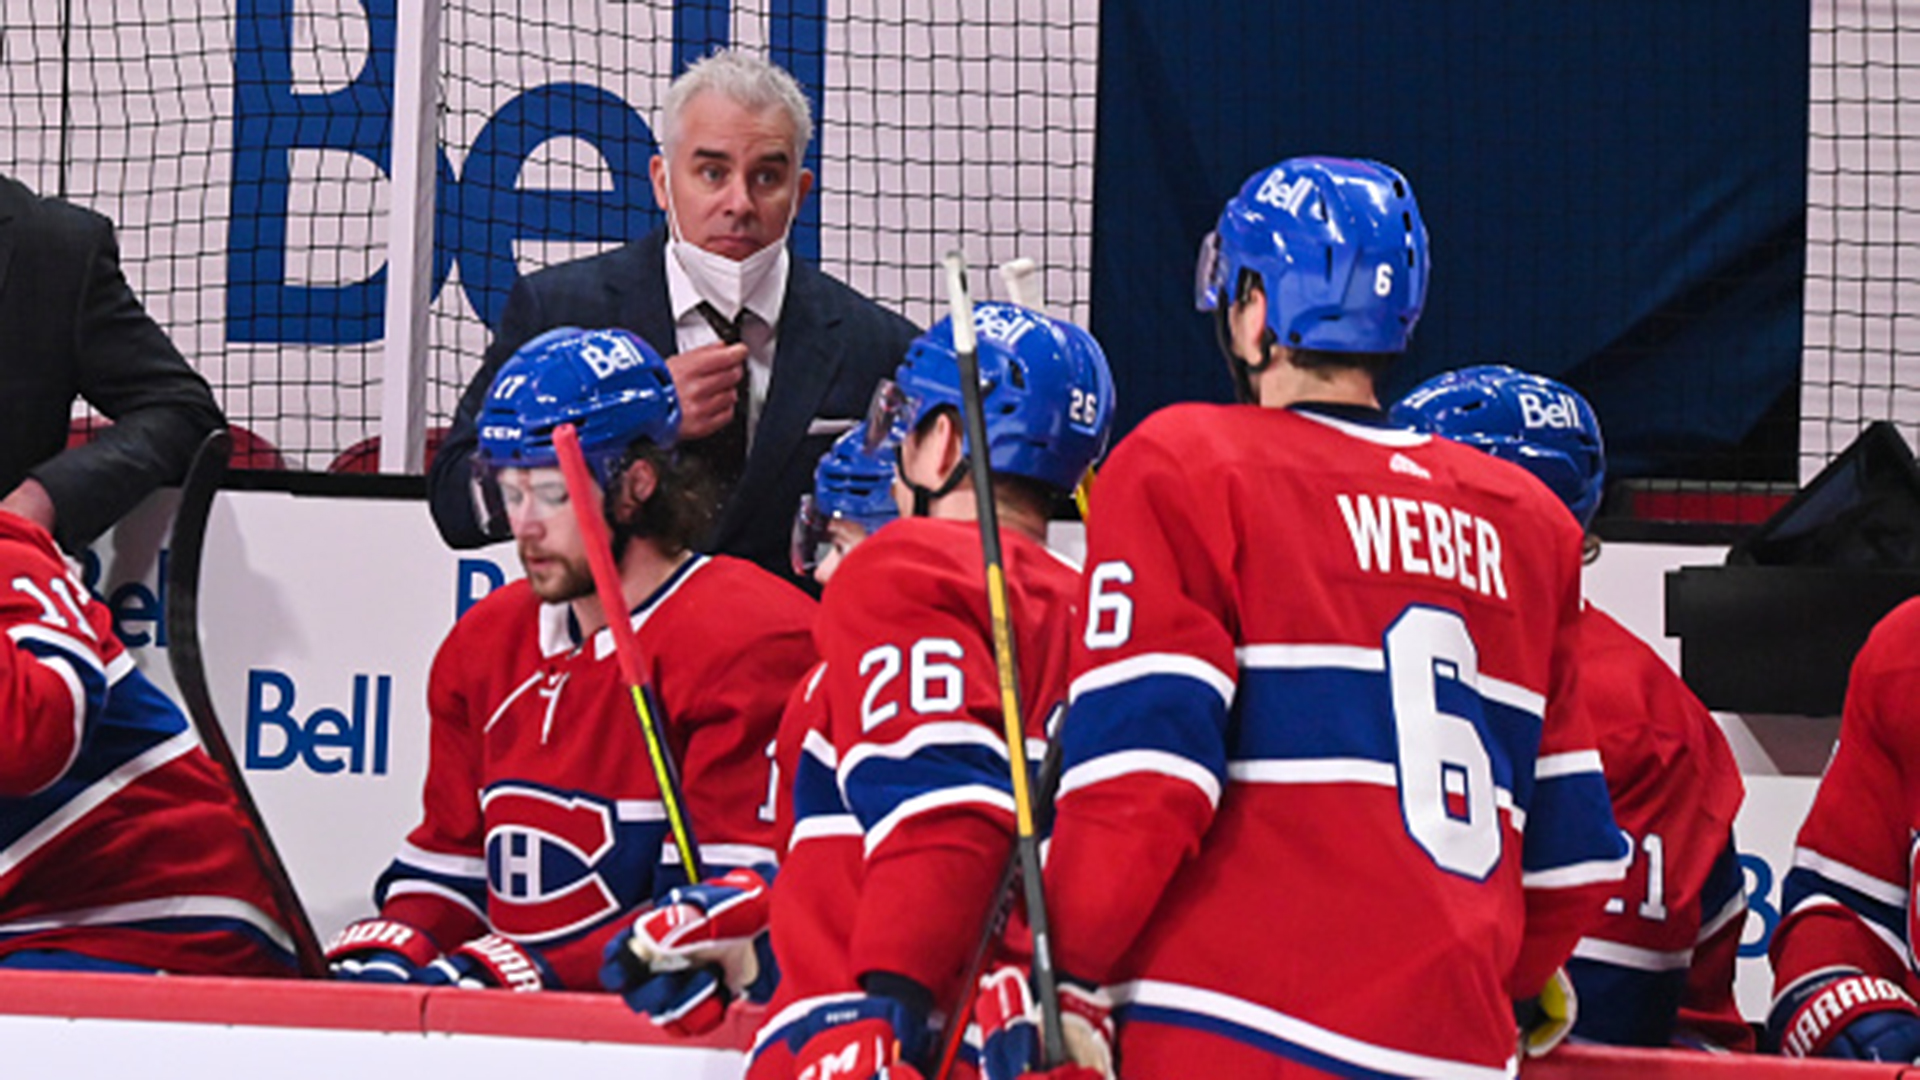 Lu explains how Game 4 highlighted a concerning trend for the Habs in the series